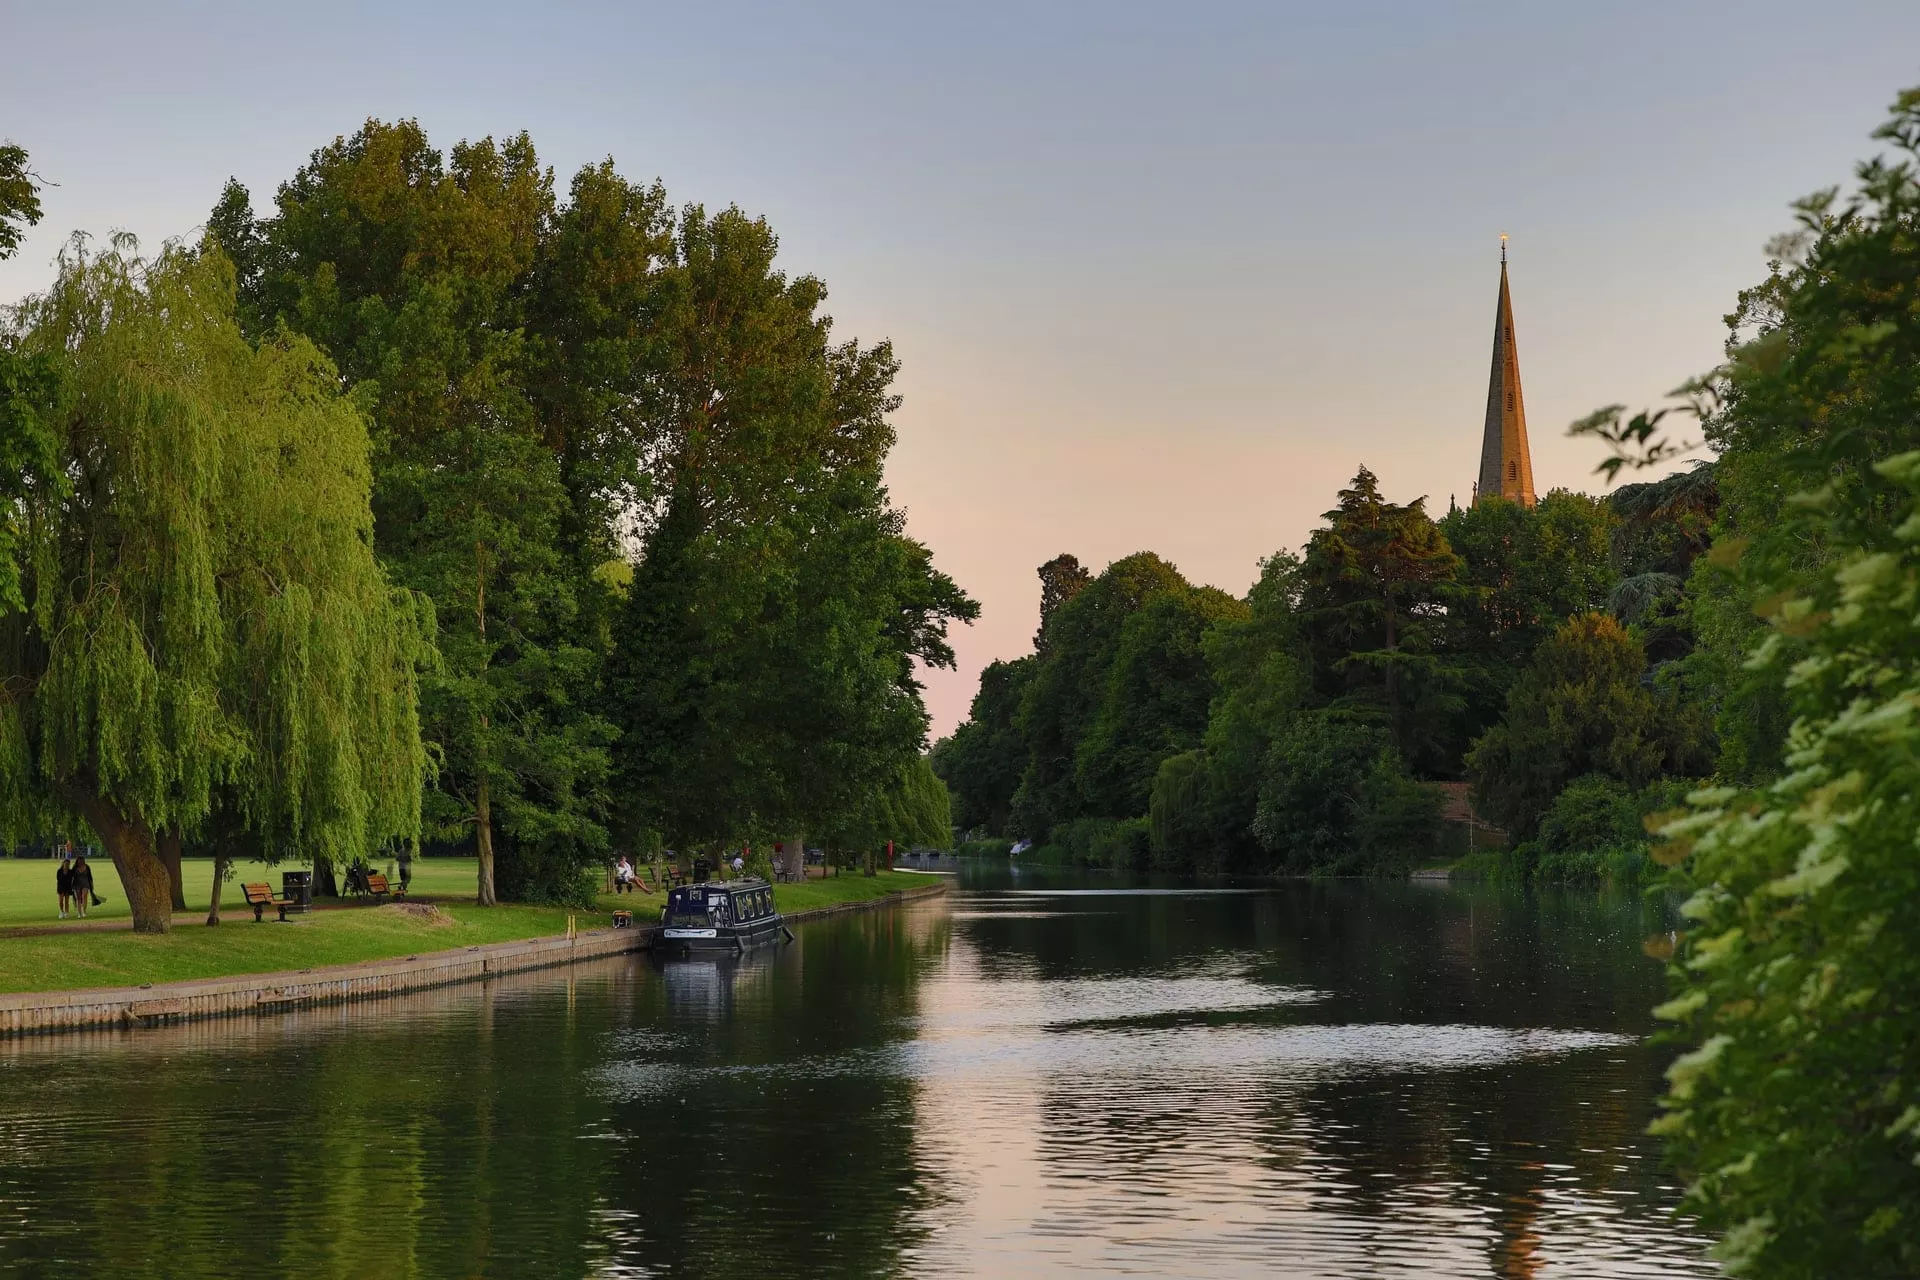 sunset-on-river-going-through-town-by-trees-and-church-stratford-upon-avon-england